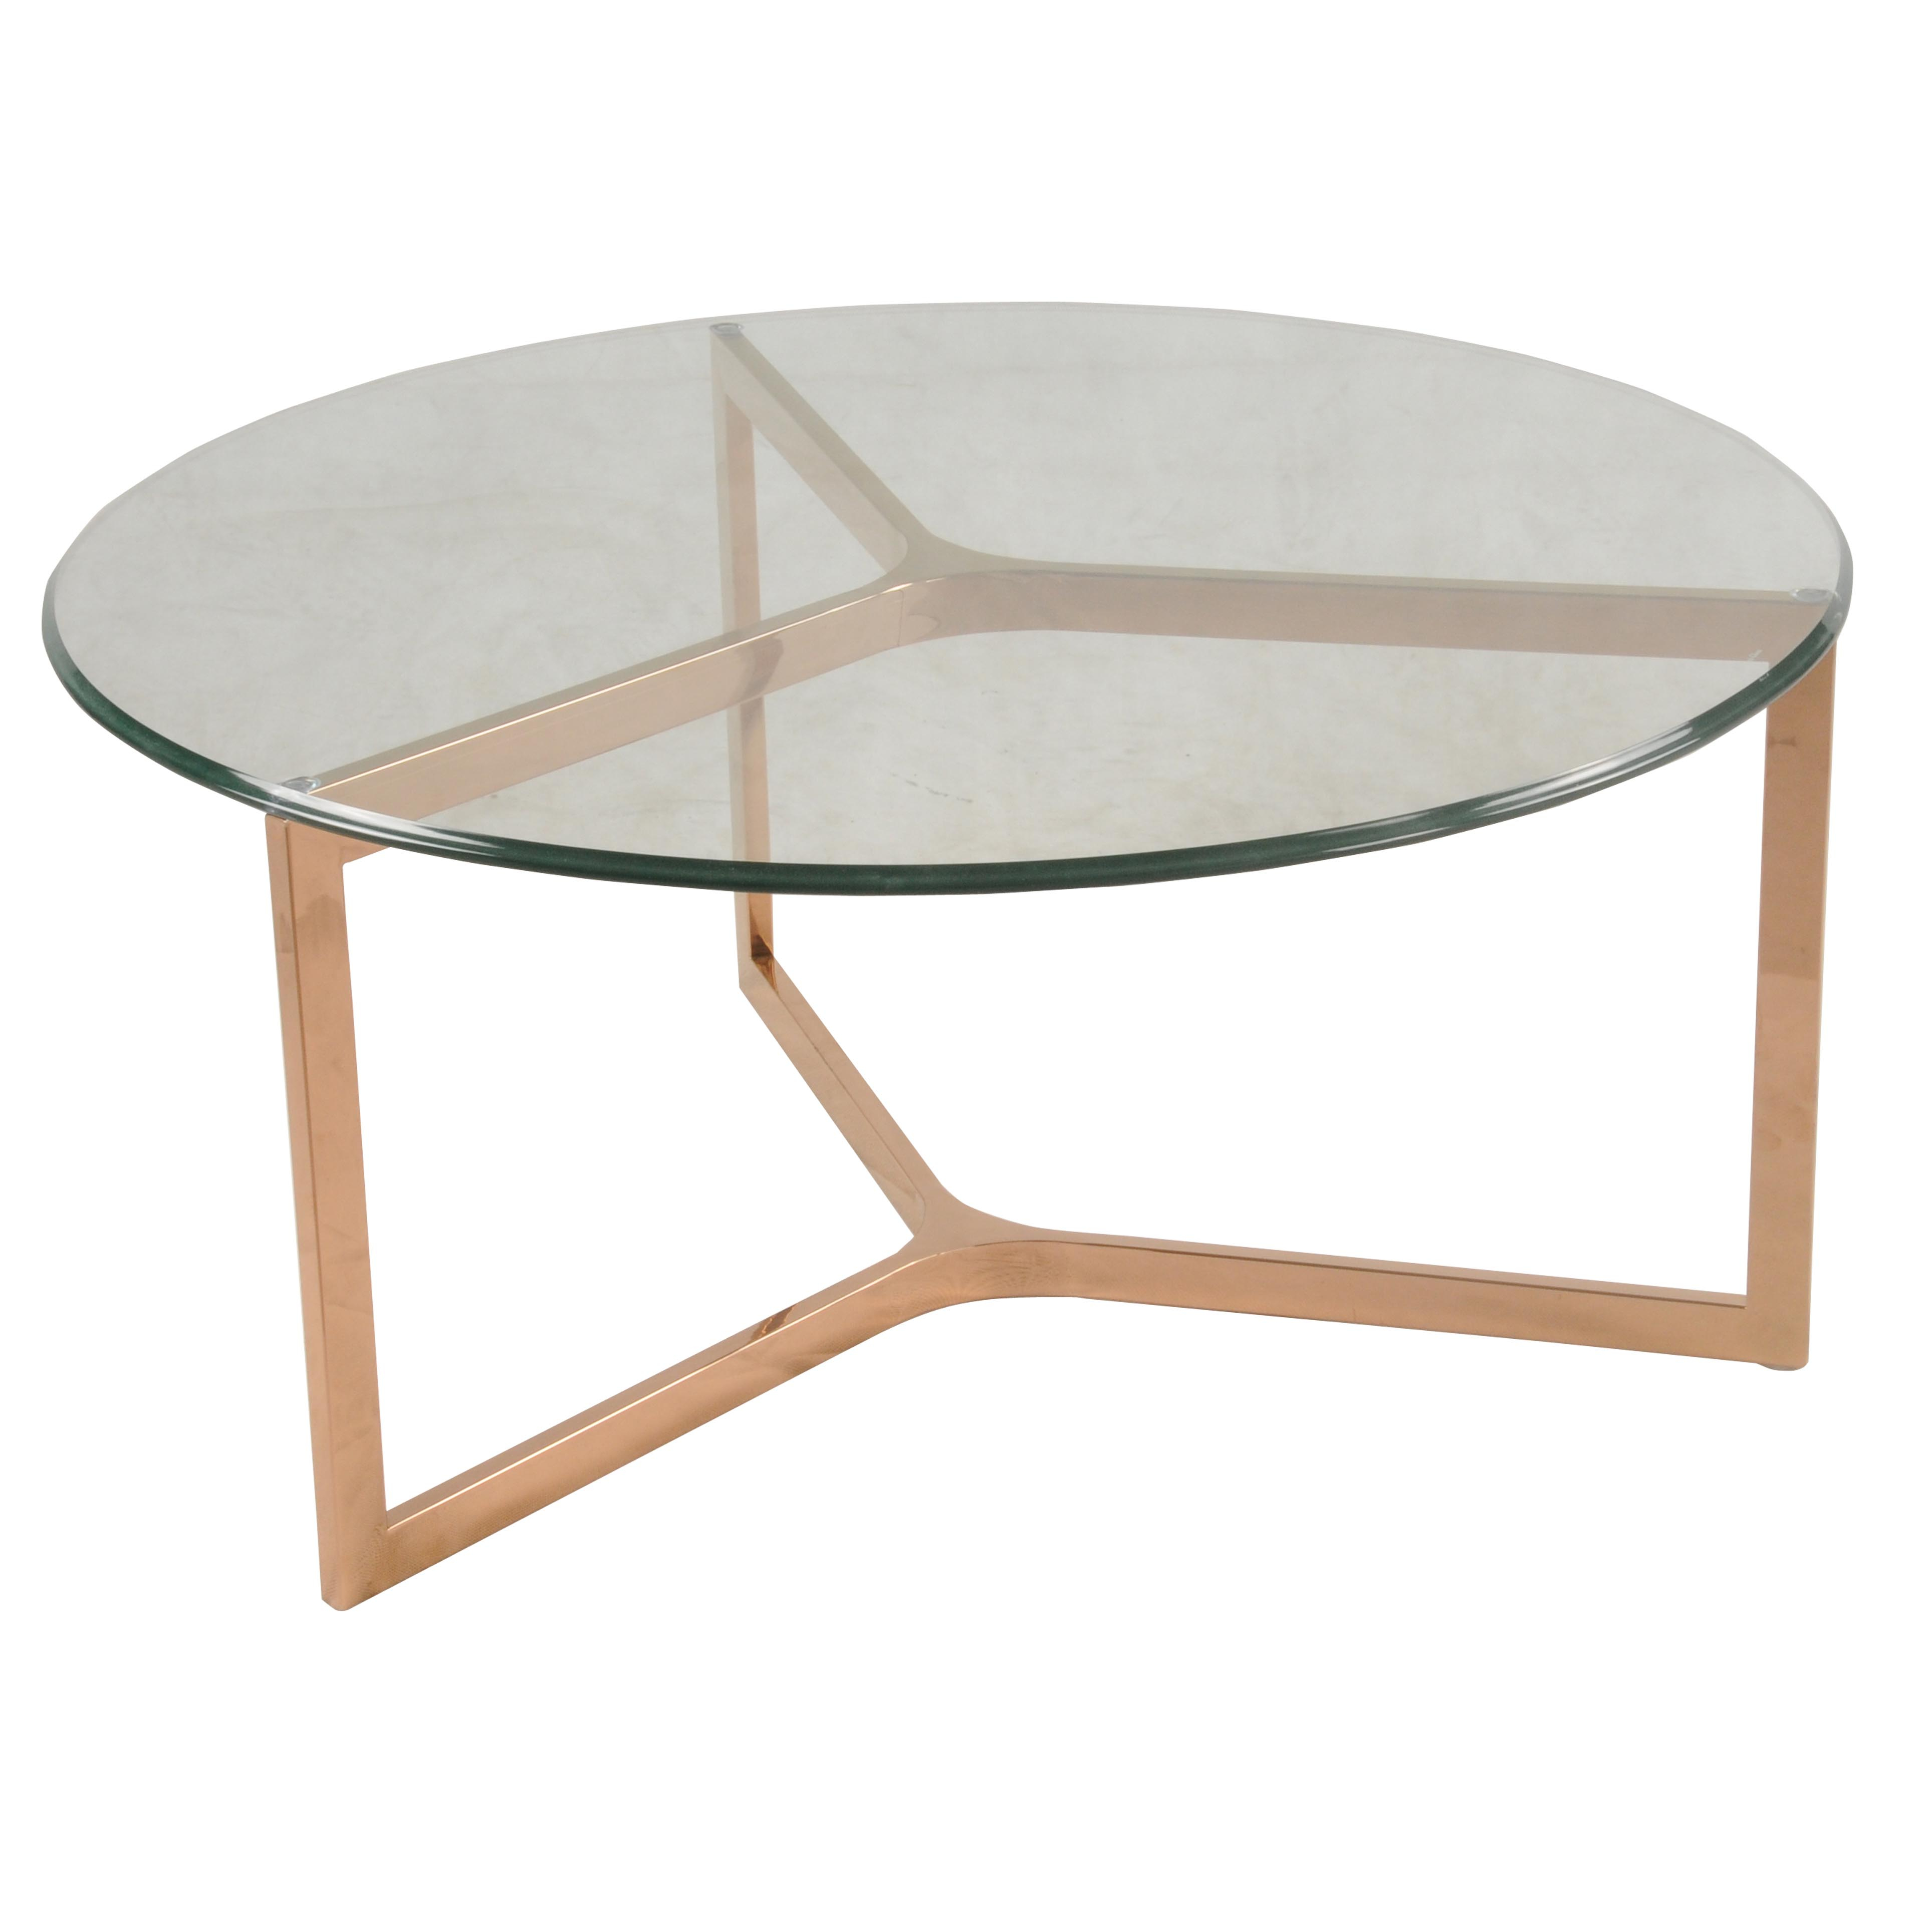 Monza Round Coffee Table Glass Top Rose Gold Boulevard Urban Living intended for size 3856 X 3856